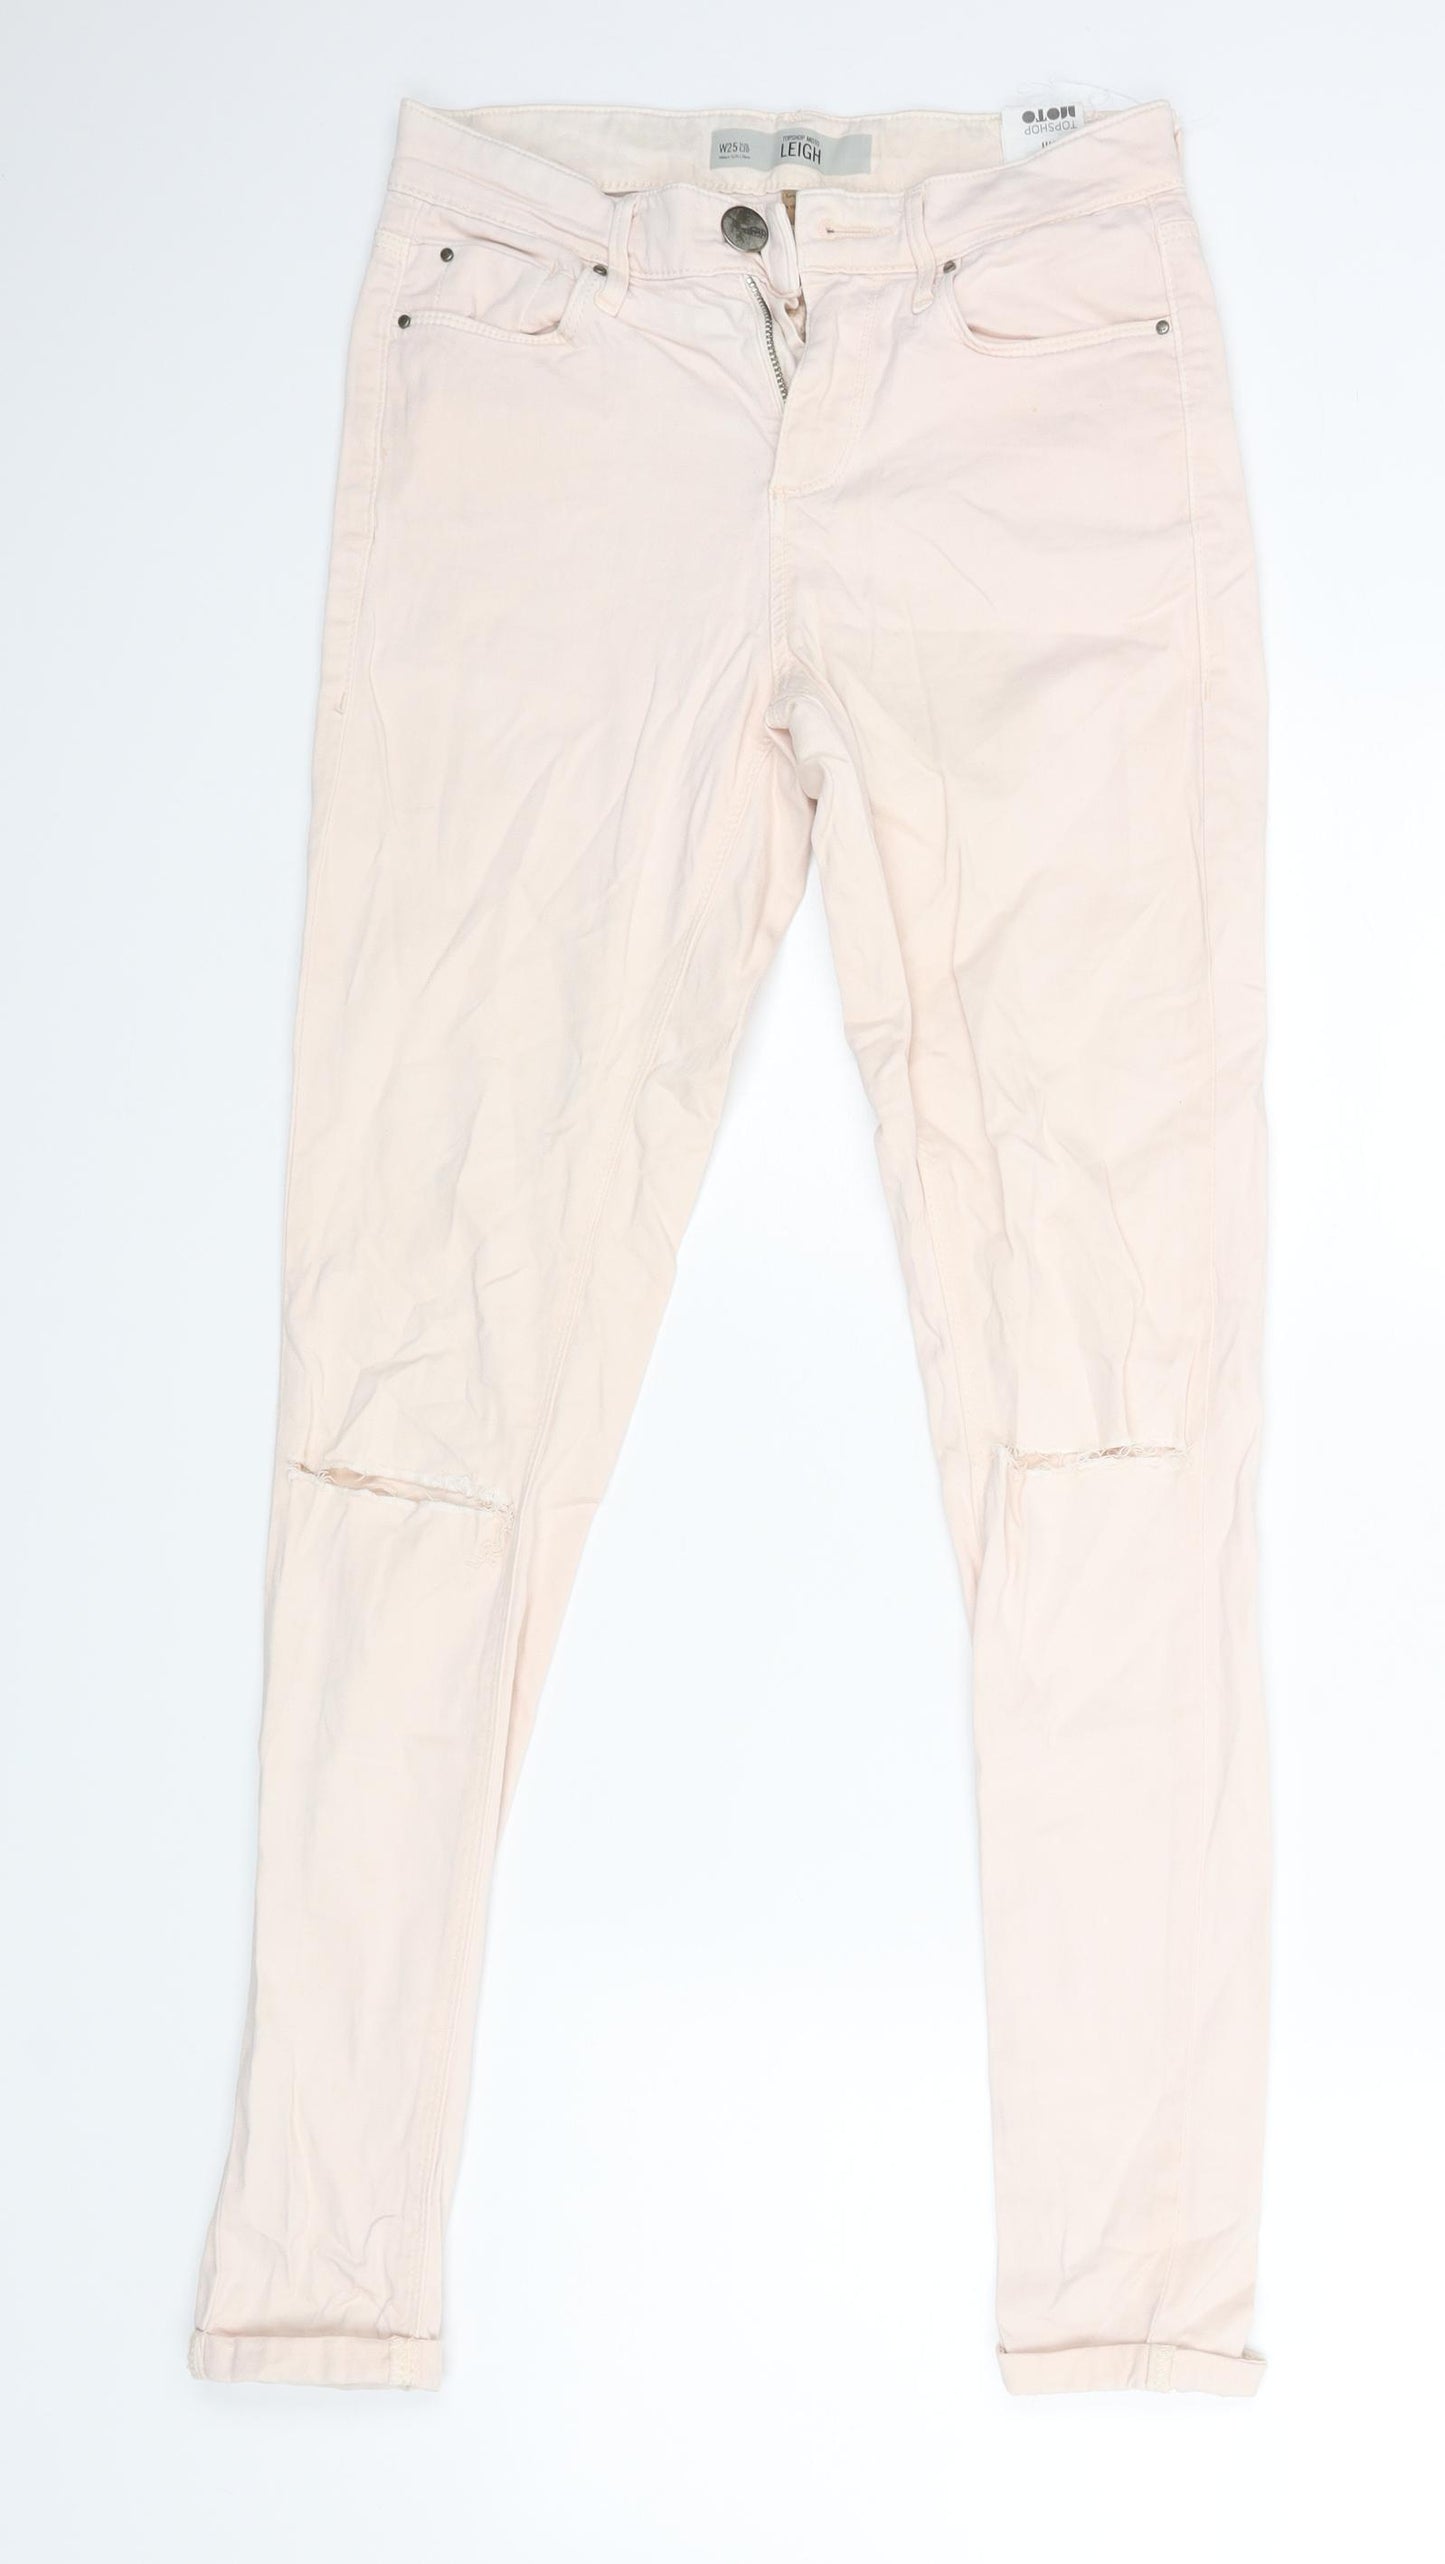 Topshop Womens Pink   Skinny Jeans Size 25 L30 in